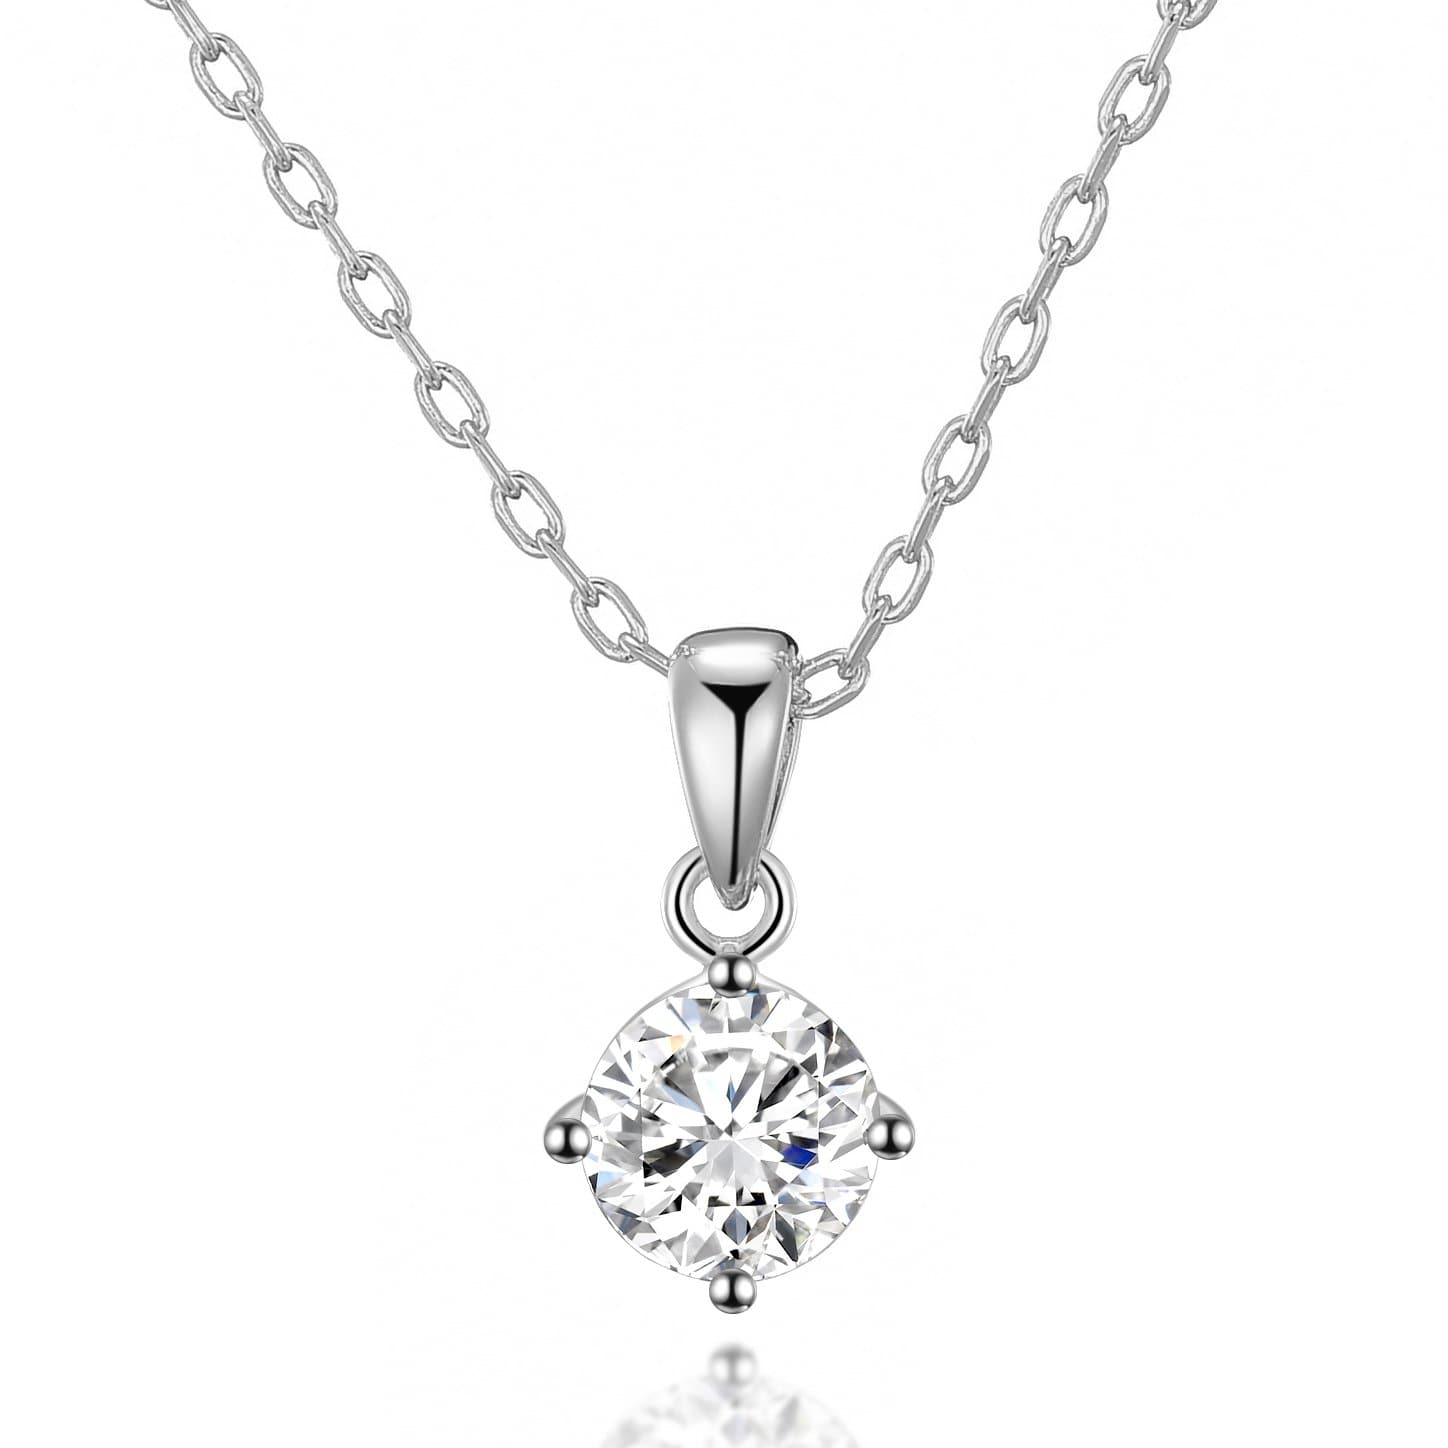 Sterling Silver Solitaire Necklace Created with Zircondia® Crystals by Philip Jones Jewellery